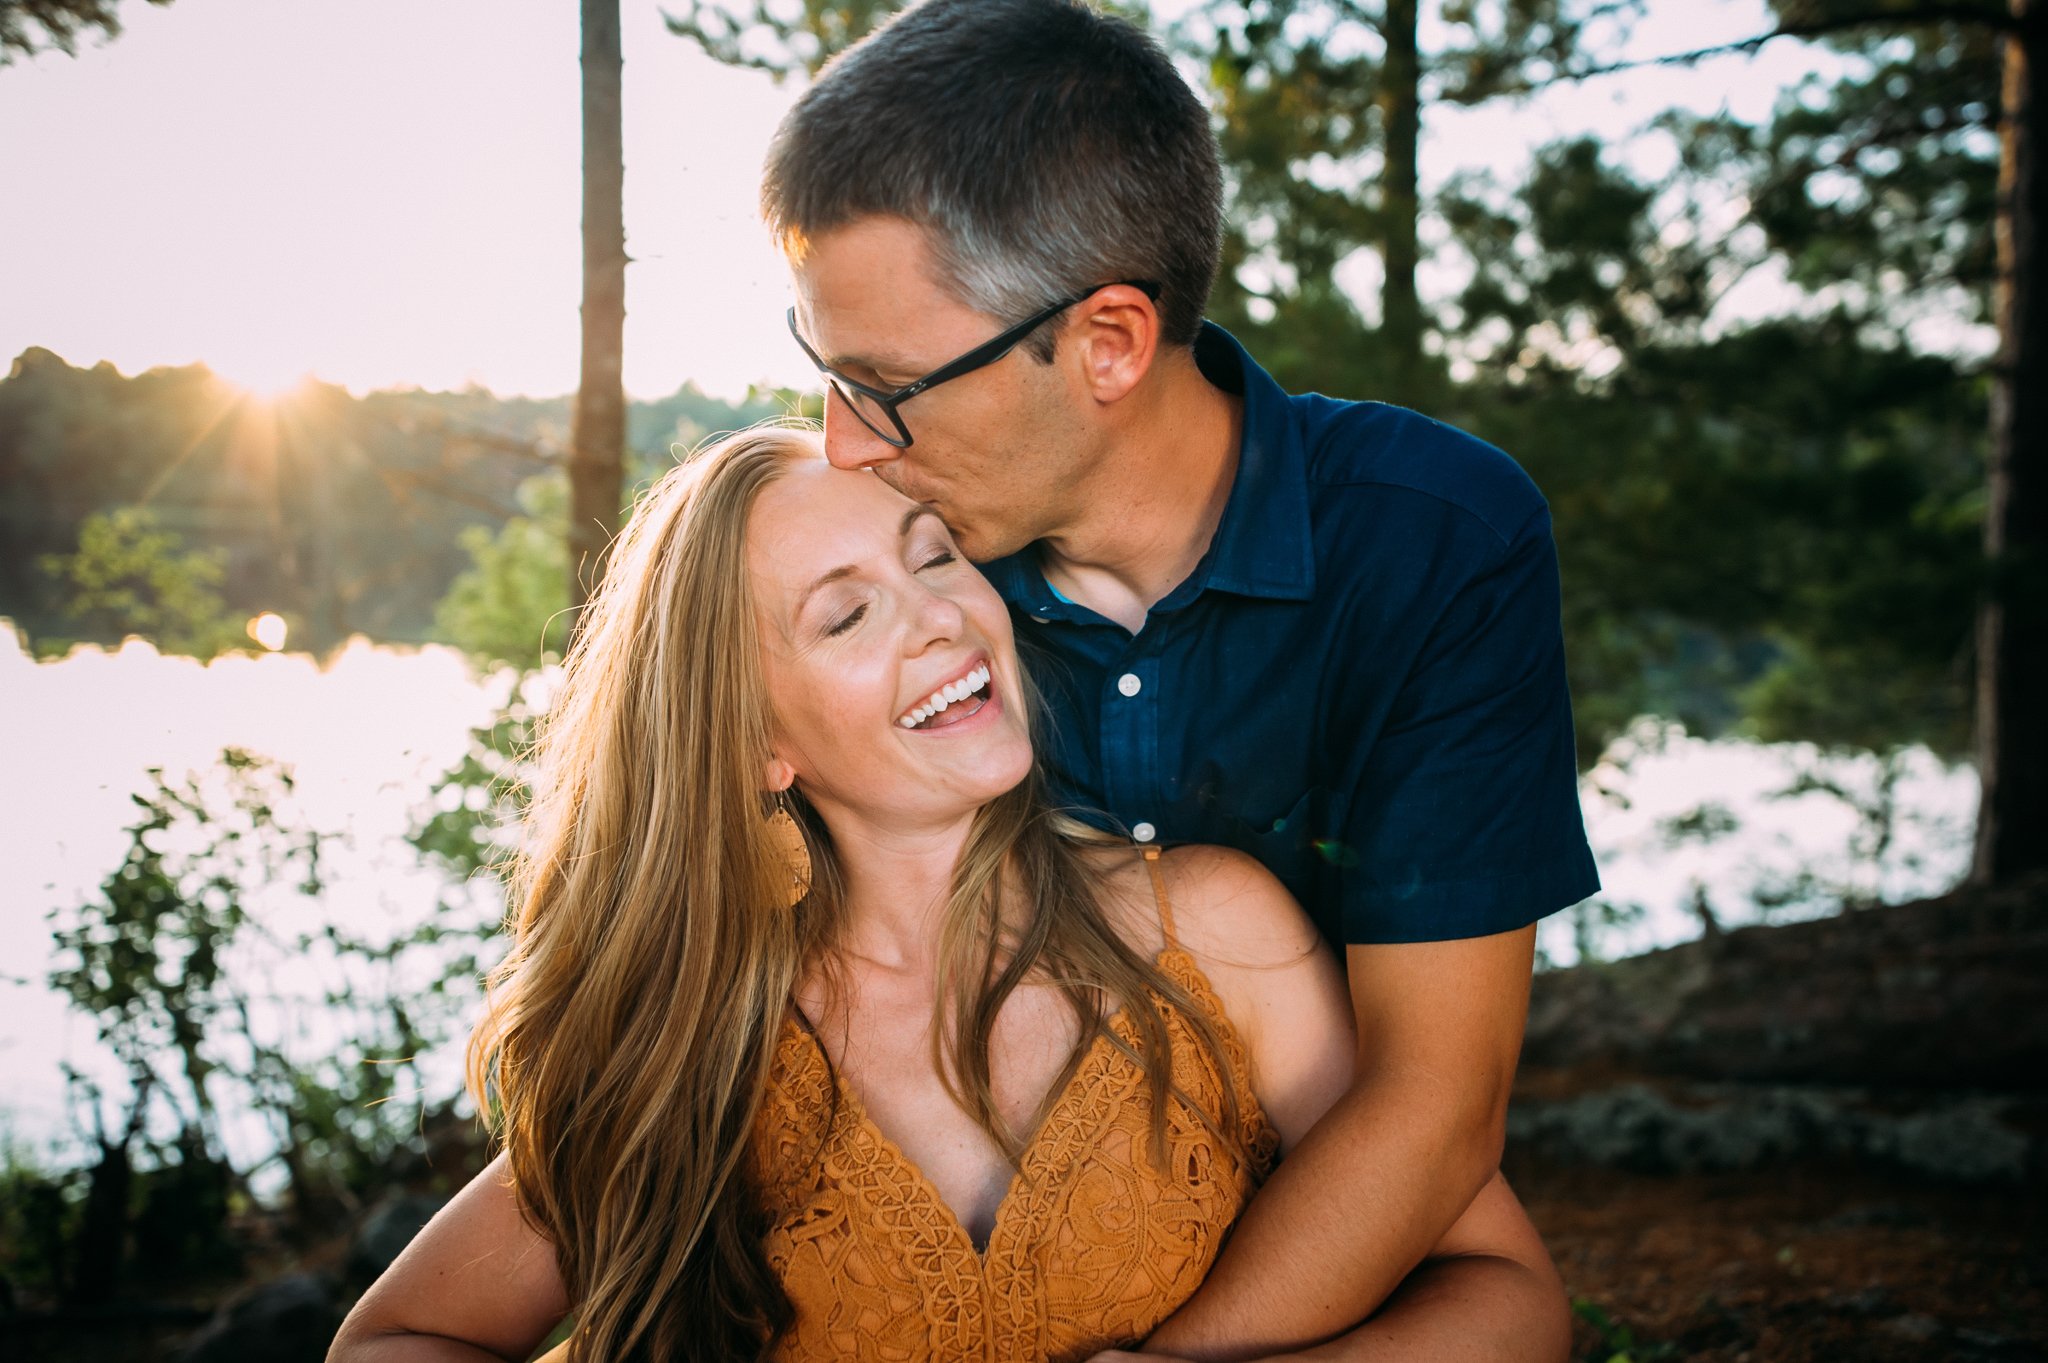 engagement, Wisconsin engagement Photographer, Wausau, Green Bay, Milwaukee, Madison, Minocqua, Door County, What to Wear Photos, unique engagement photos  (Copy) (Copy) (Copy)